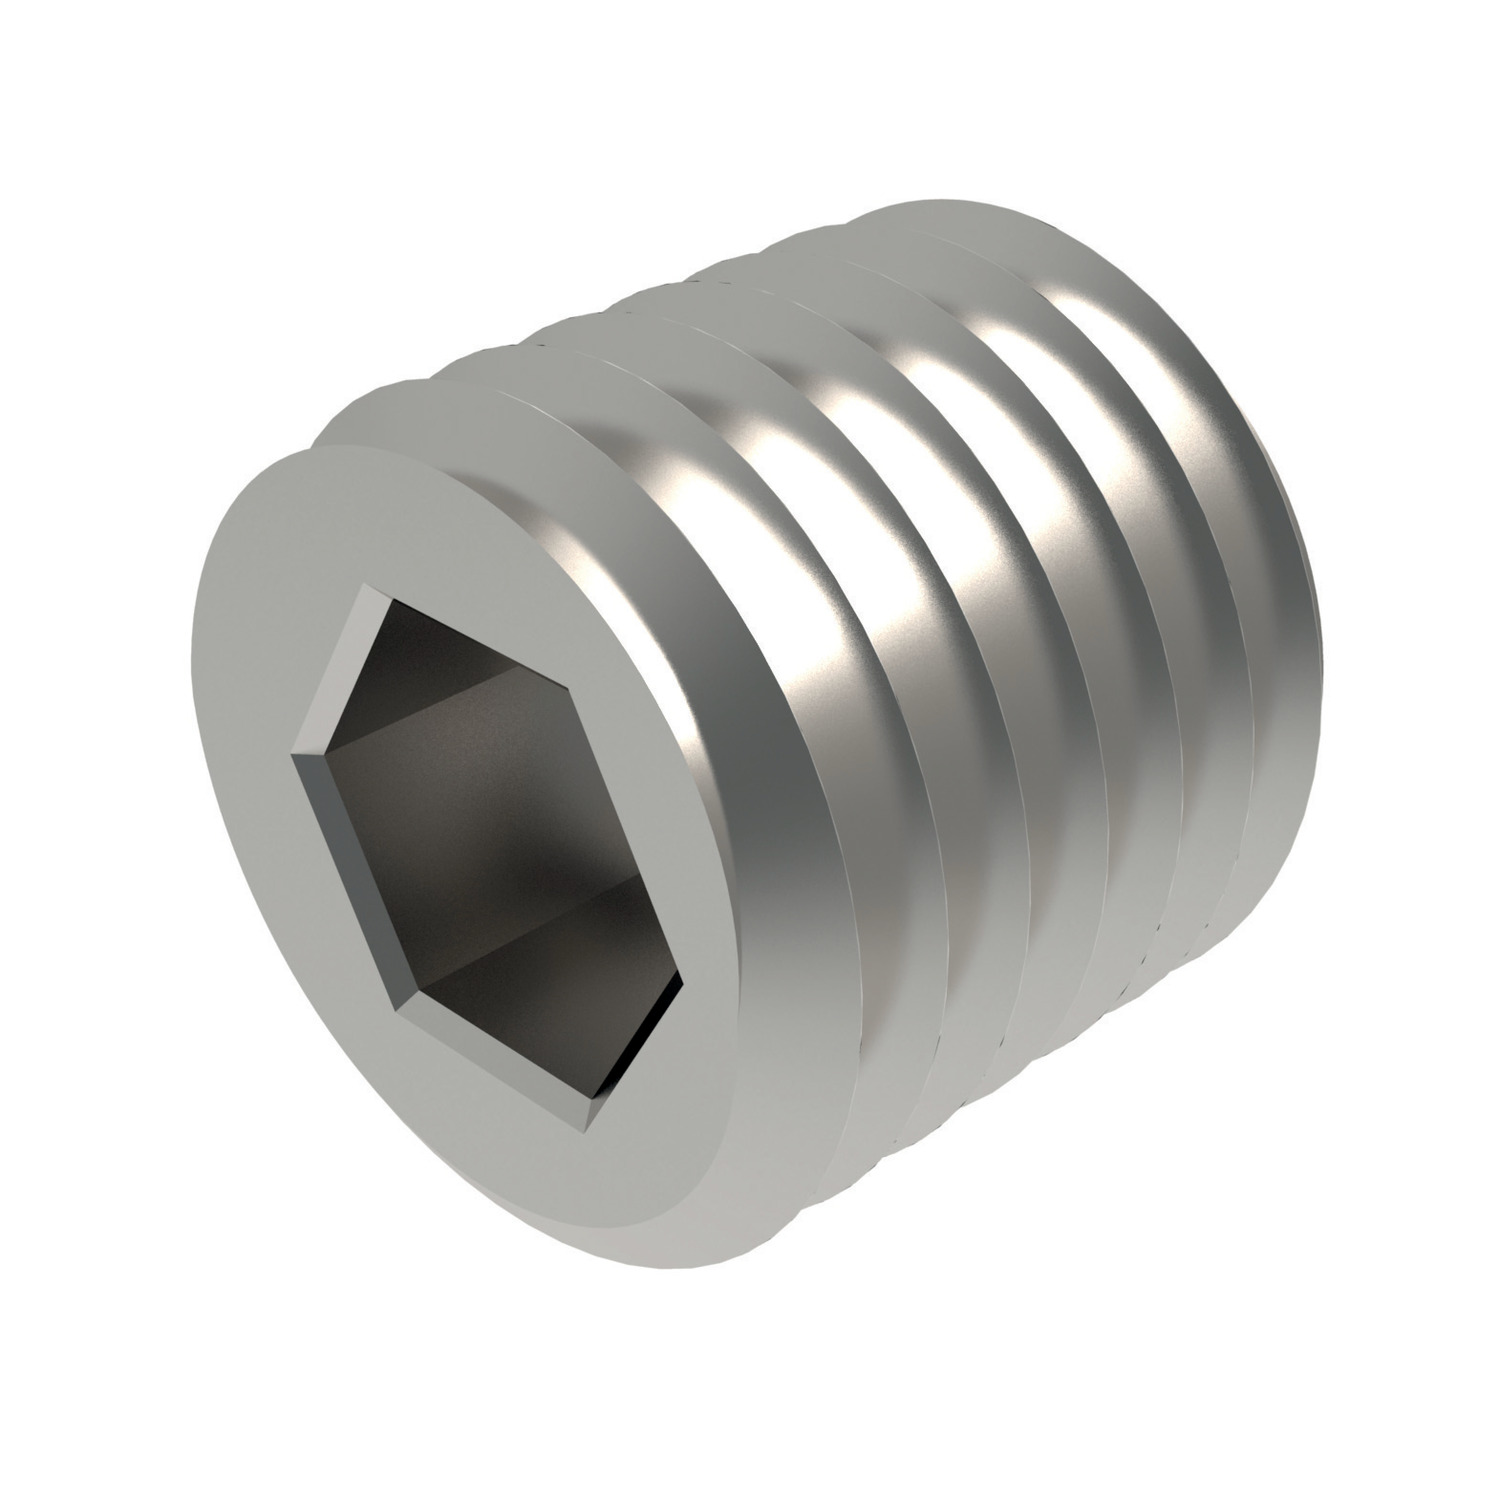 P0199.080-015-A2 Threaded Restrictor M8x1. 1.49 orifice A2 stainless steel. DANGER: Ensure this part is installed according to instructions in the product data sheet and installation notes. Holes must be completely free of oil, grease and debris.